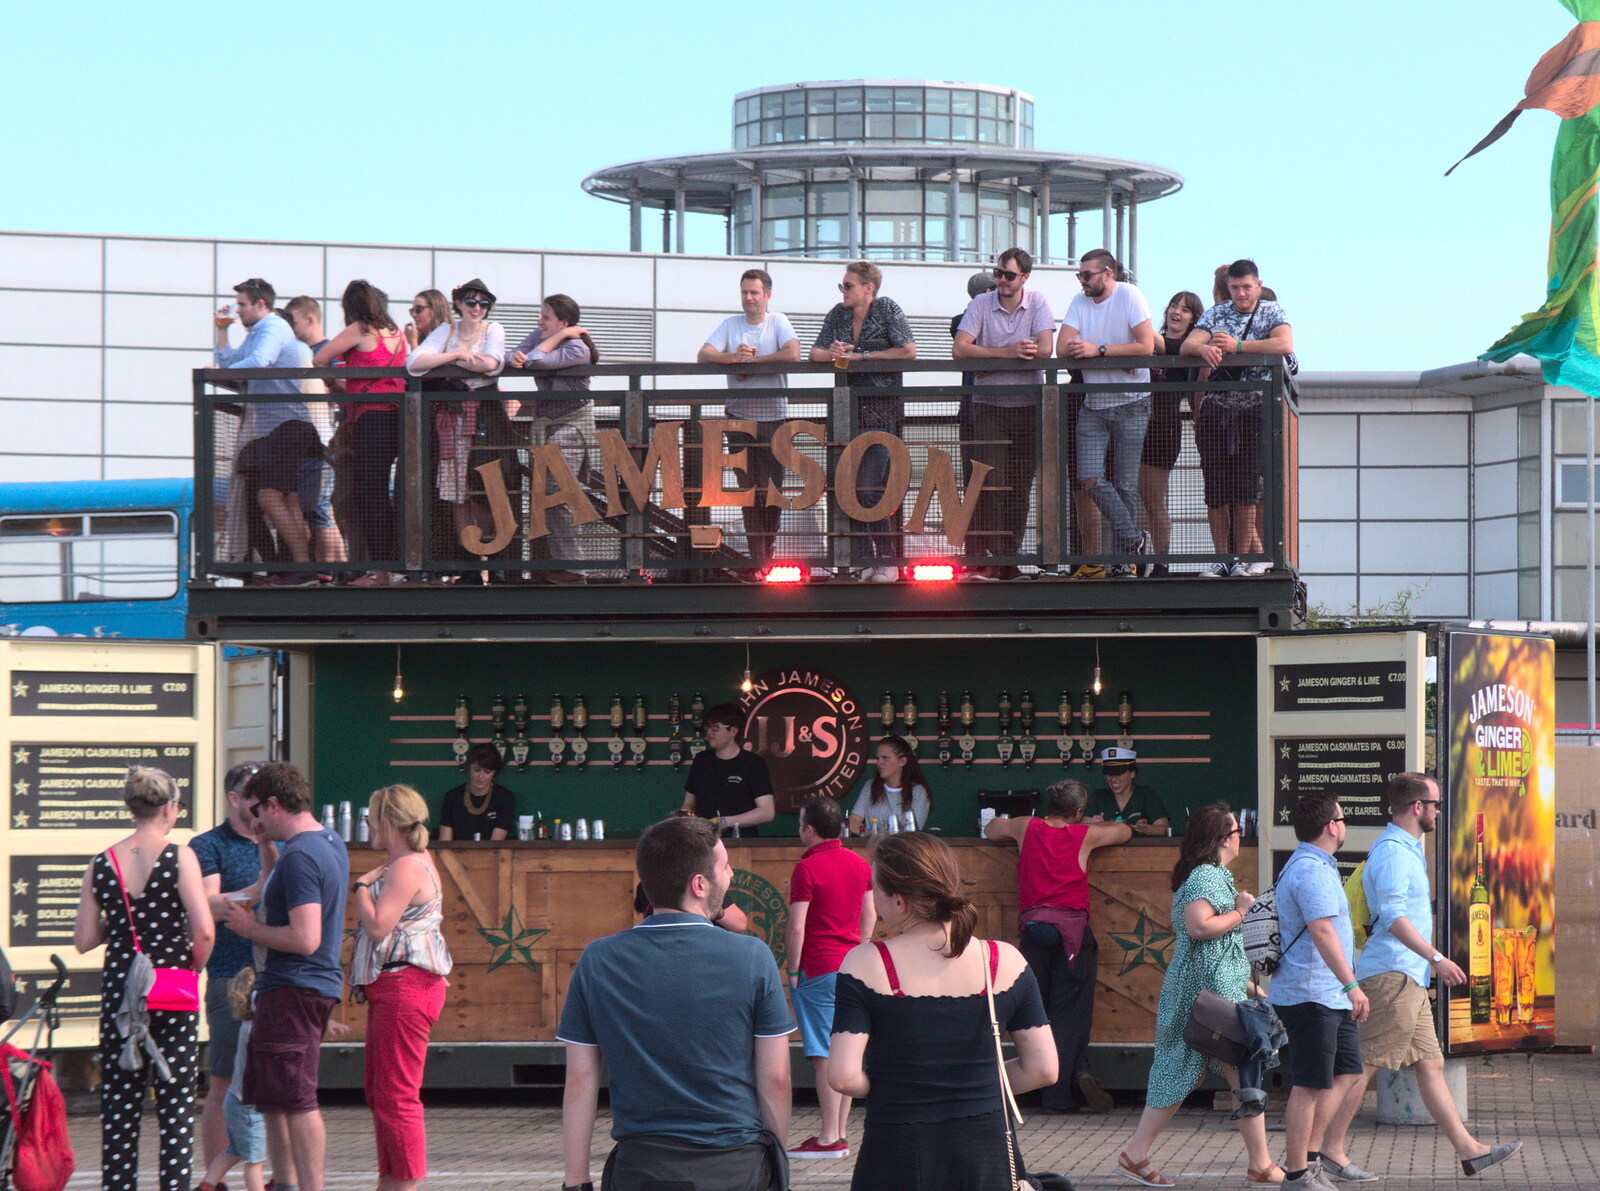 Upstairs at the Jameson stand from Beatyard Festival, Dún Laoghaire, County Dublin, Ireland - 5th August 2018